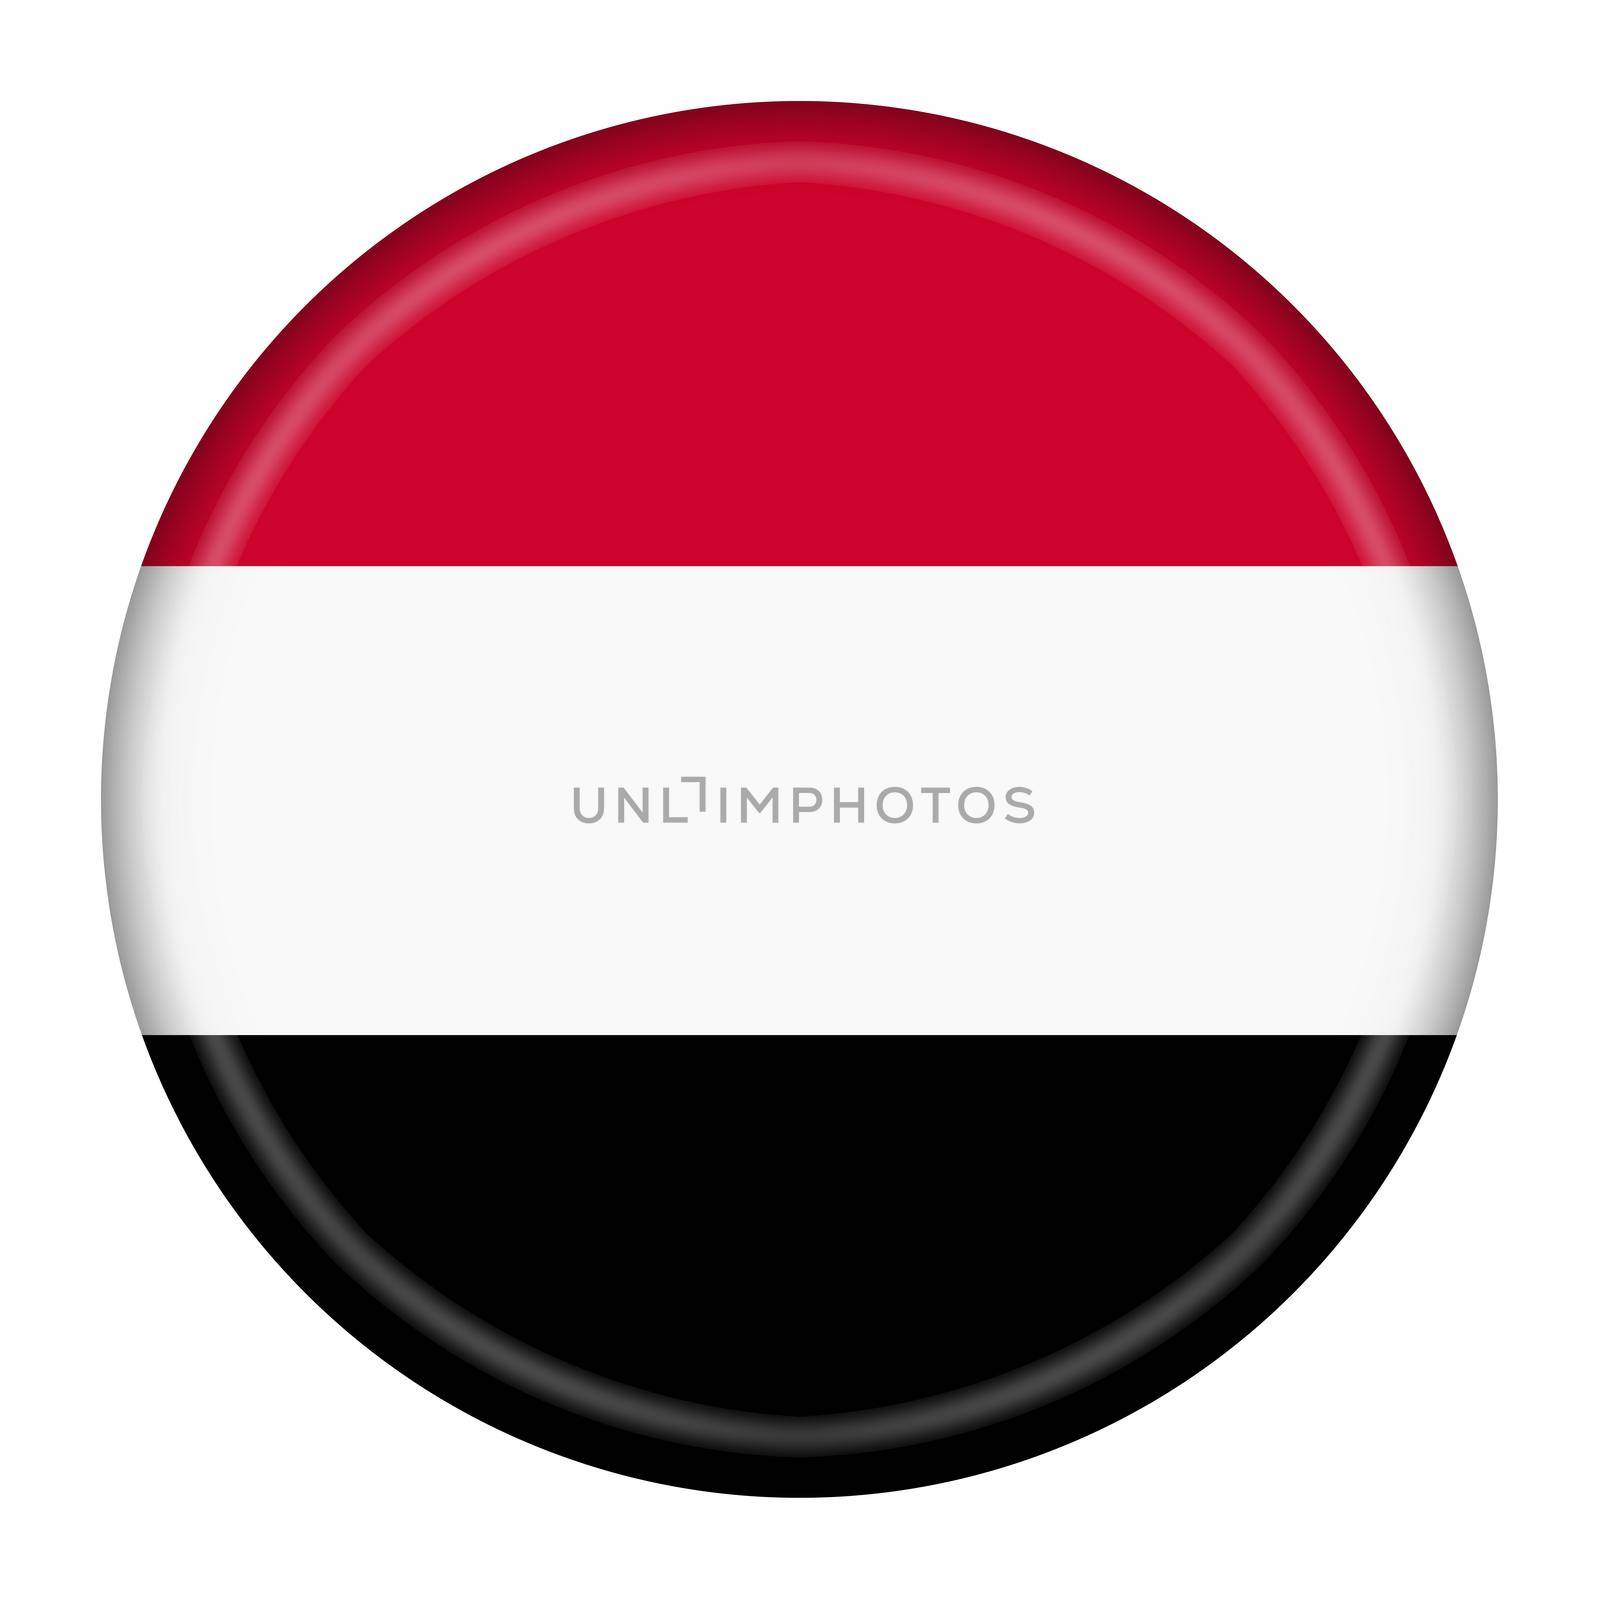 A Yemen flag button 3d illustration with clipping path